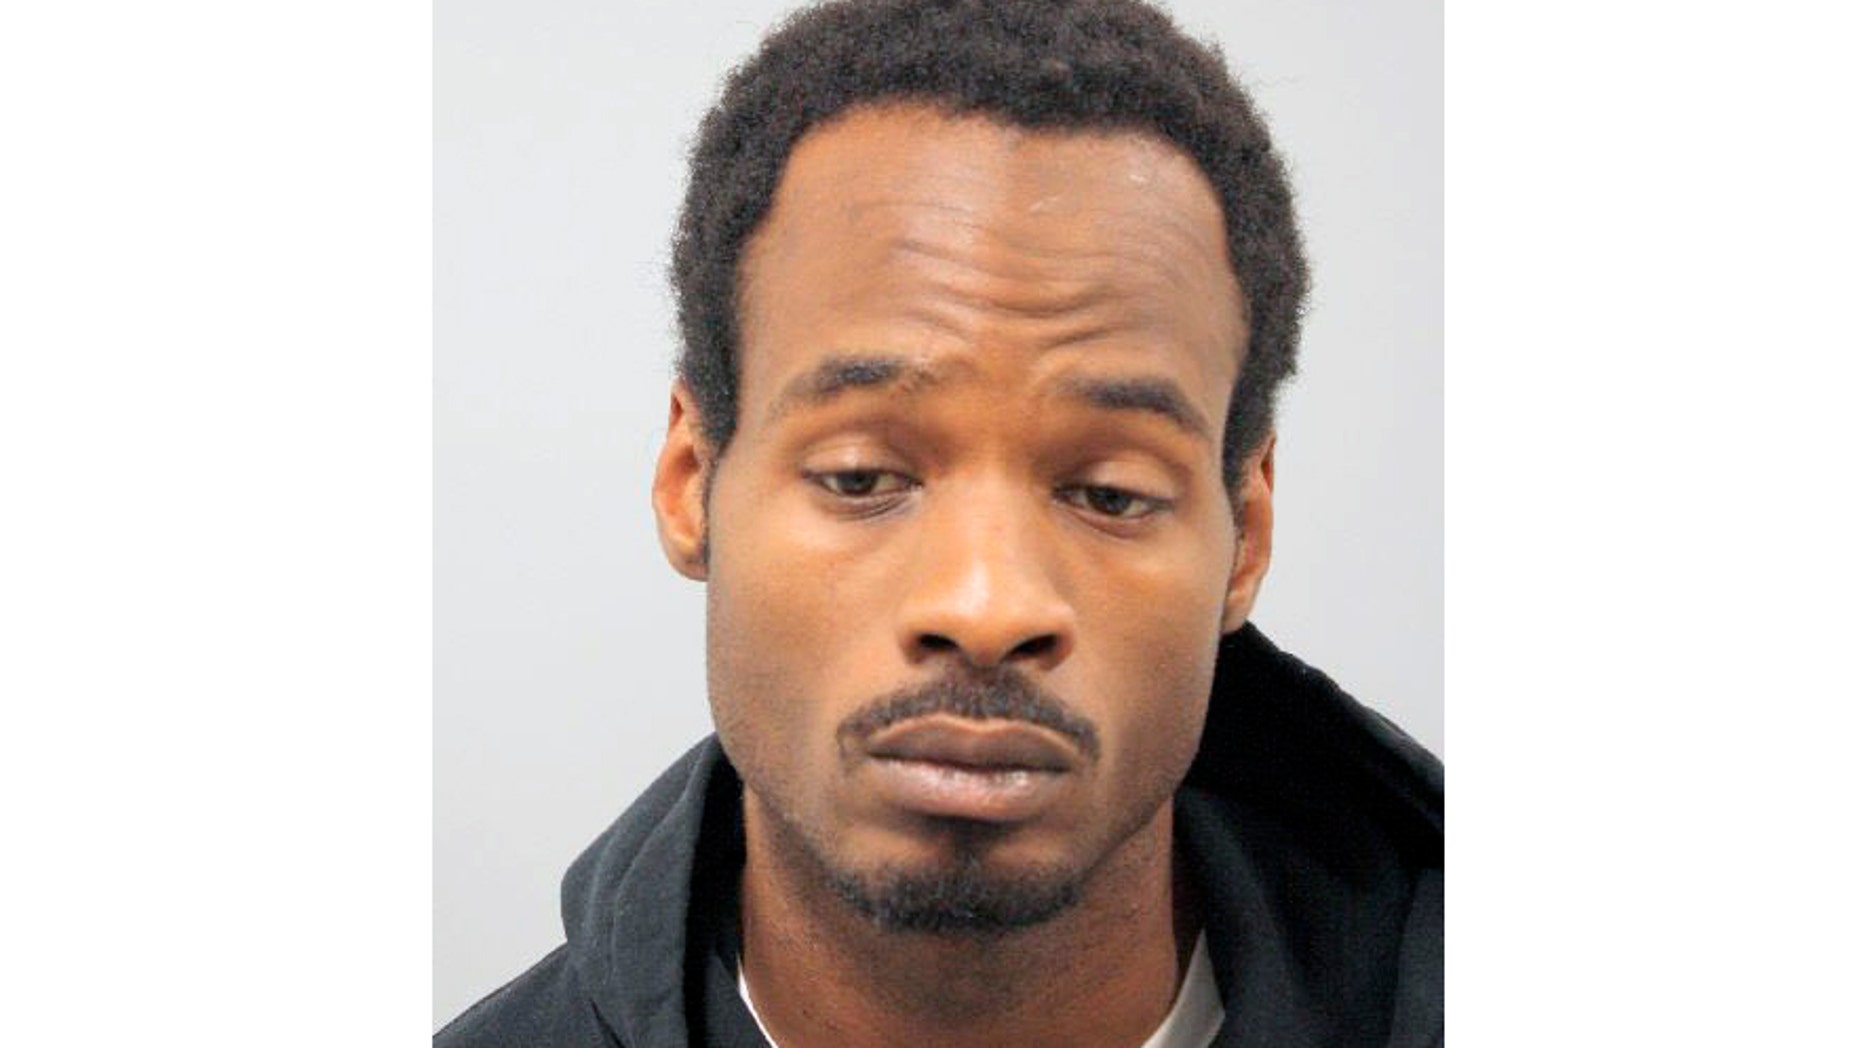 This undated photo provided by Houston police shows Darion Vence. Vence, the man who reported that Maleah Davis, age 4, had been kidnapped last weekend was arrested near Houston on Saturday, May 11, 2019 in connection with his disappearance and the police said that they had found blood in his apartment. (Houston Police Service via AP)